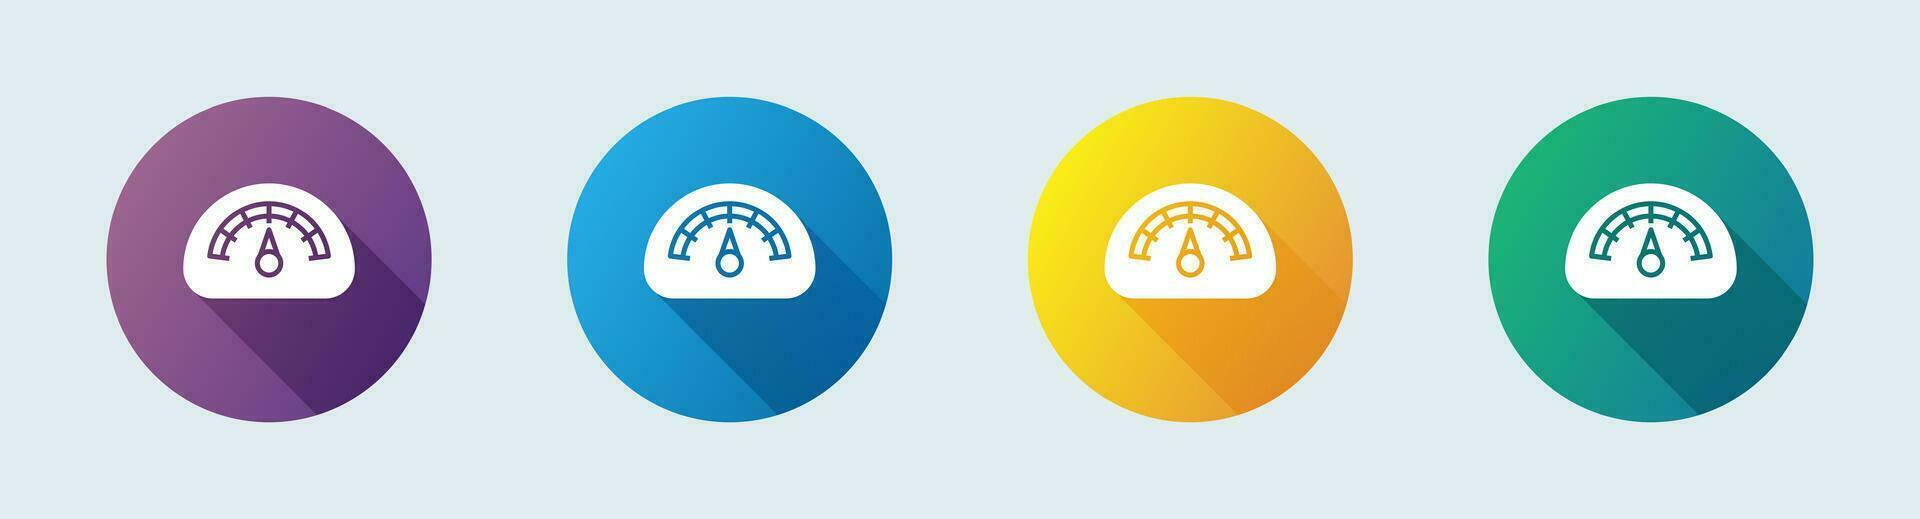 Speed meter solid icon in flat design style. Scale signs vector illustration.